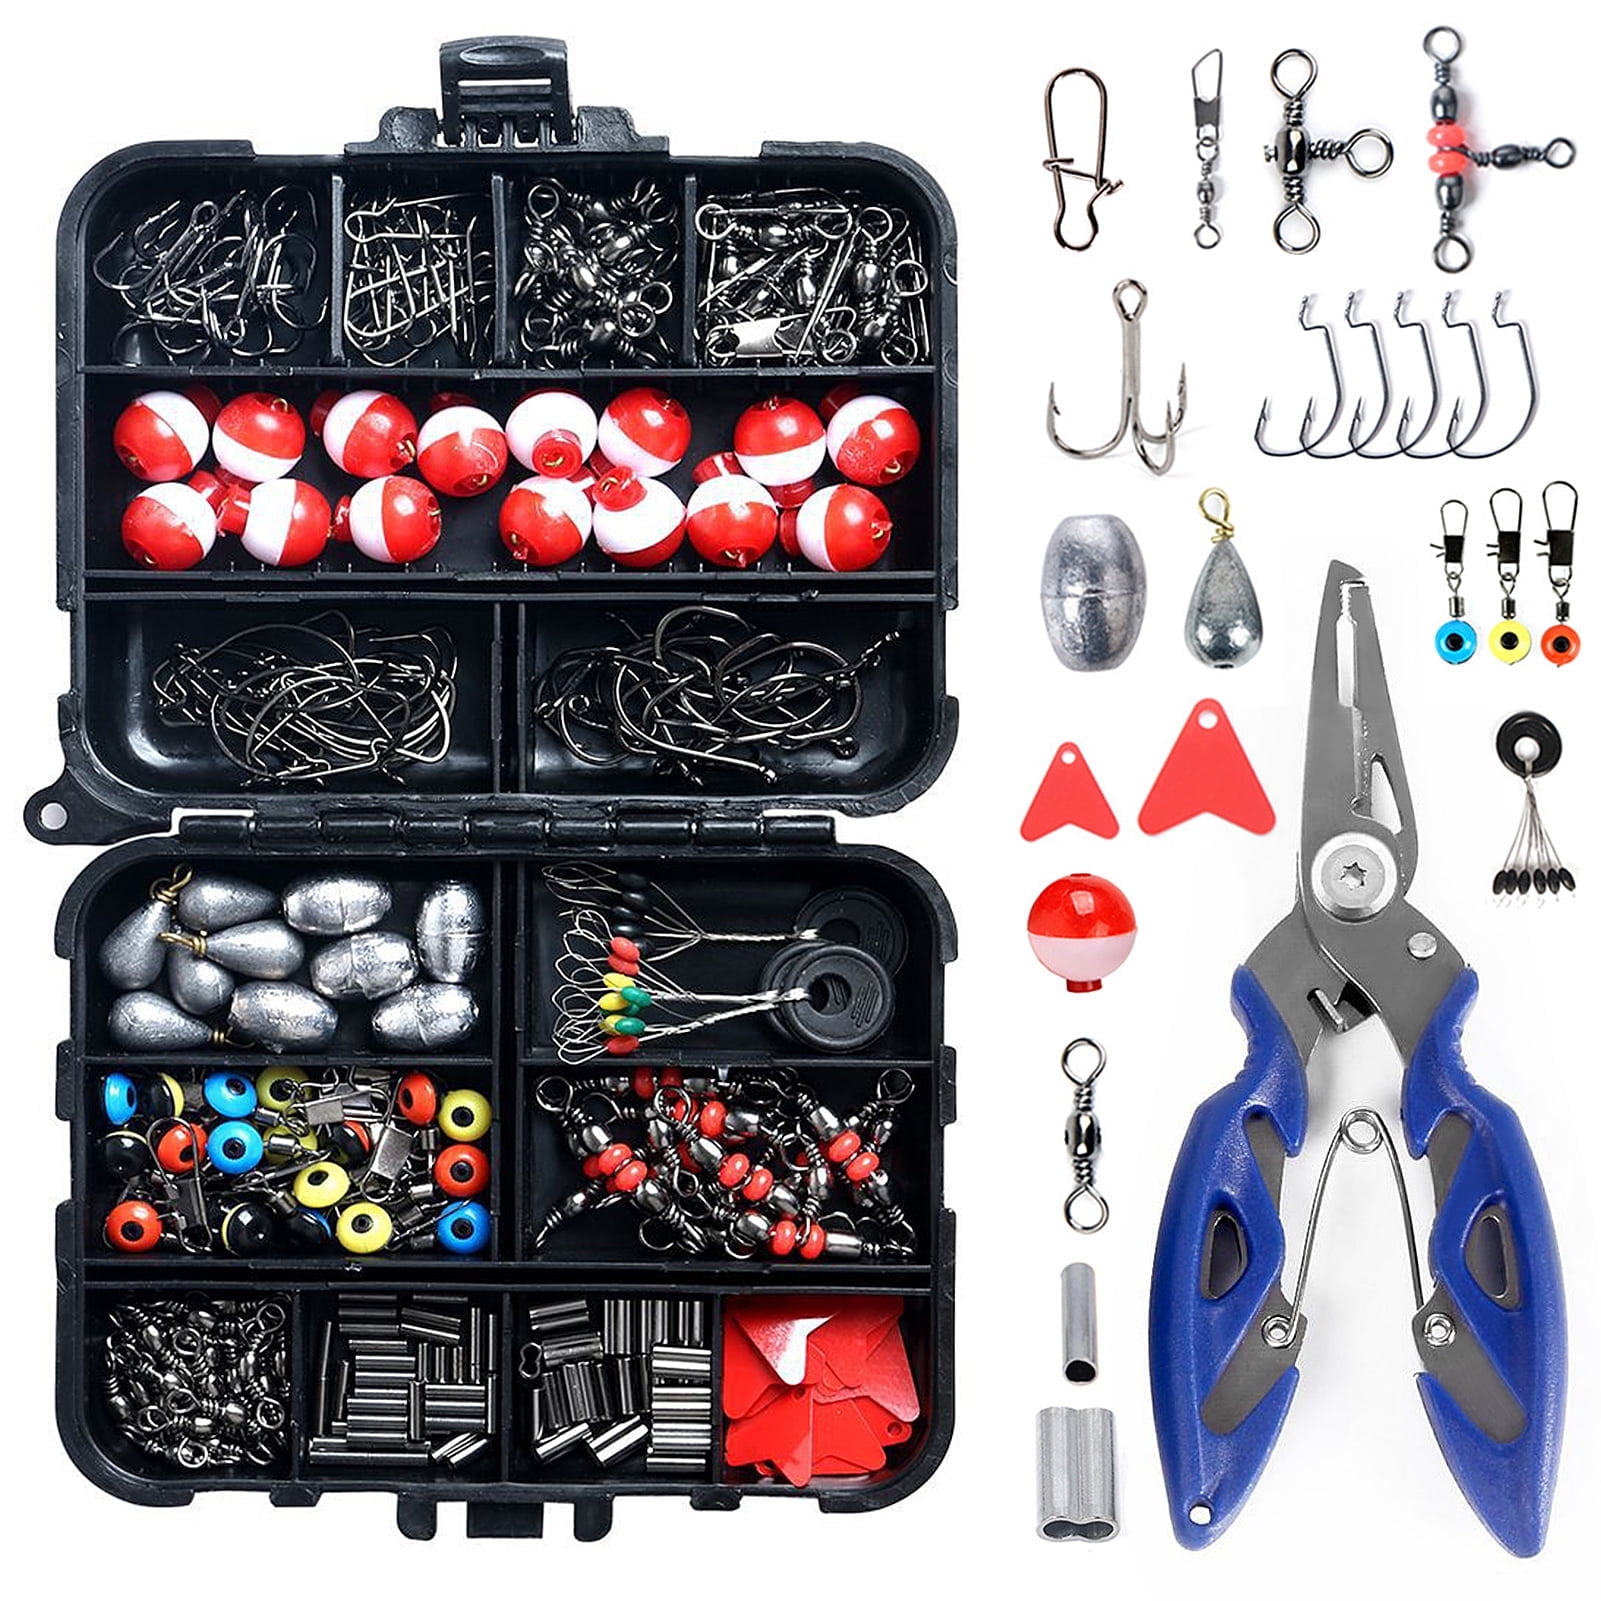 Eccomum 263pcs Fishing Accessories Set with Tackle Box Including